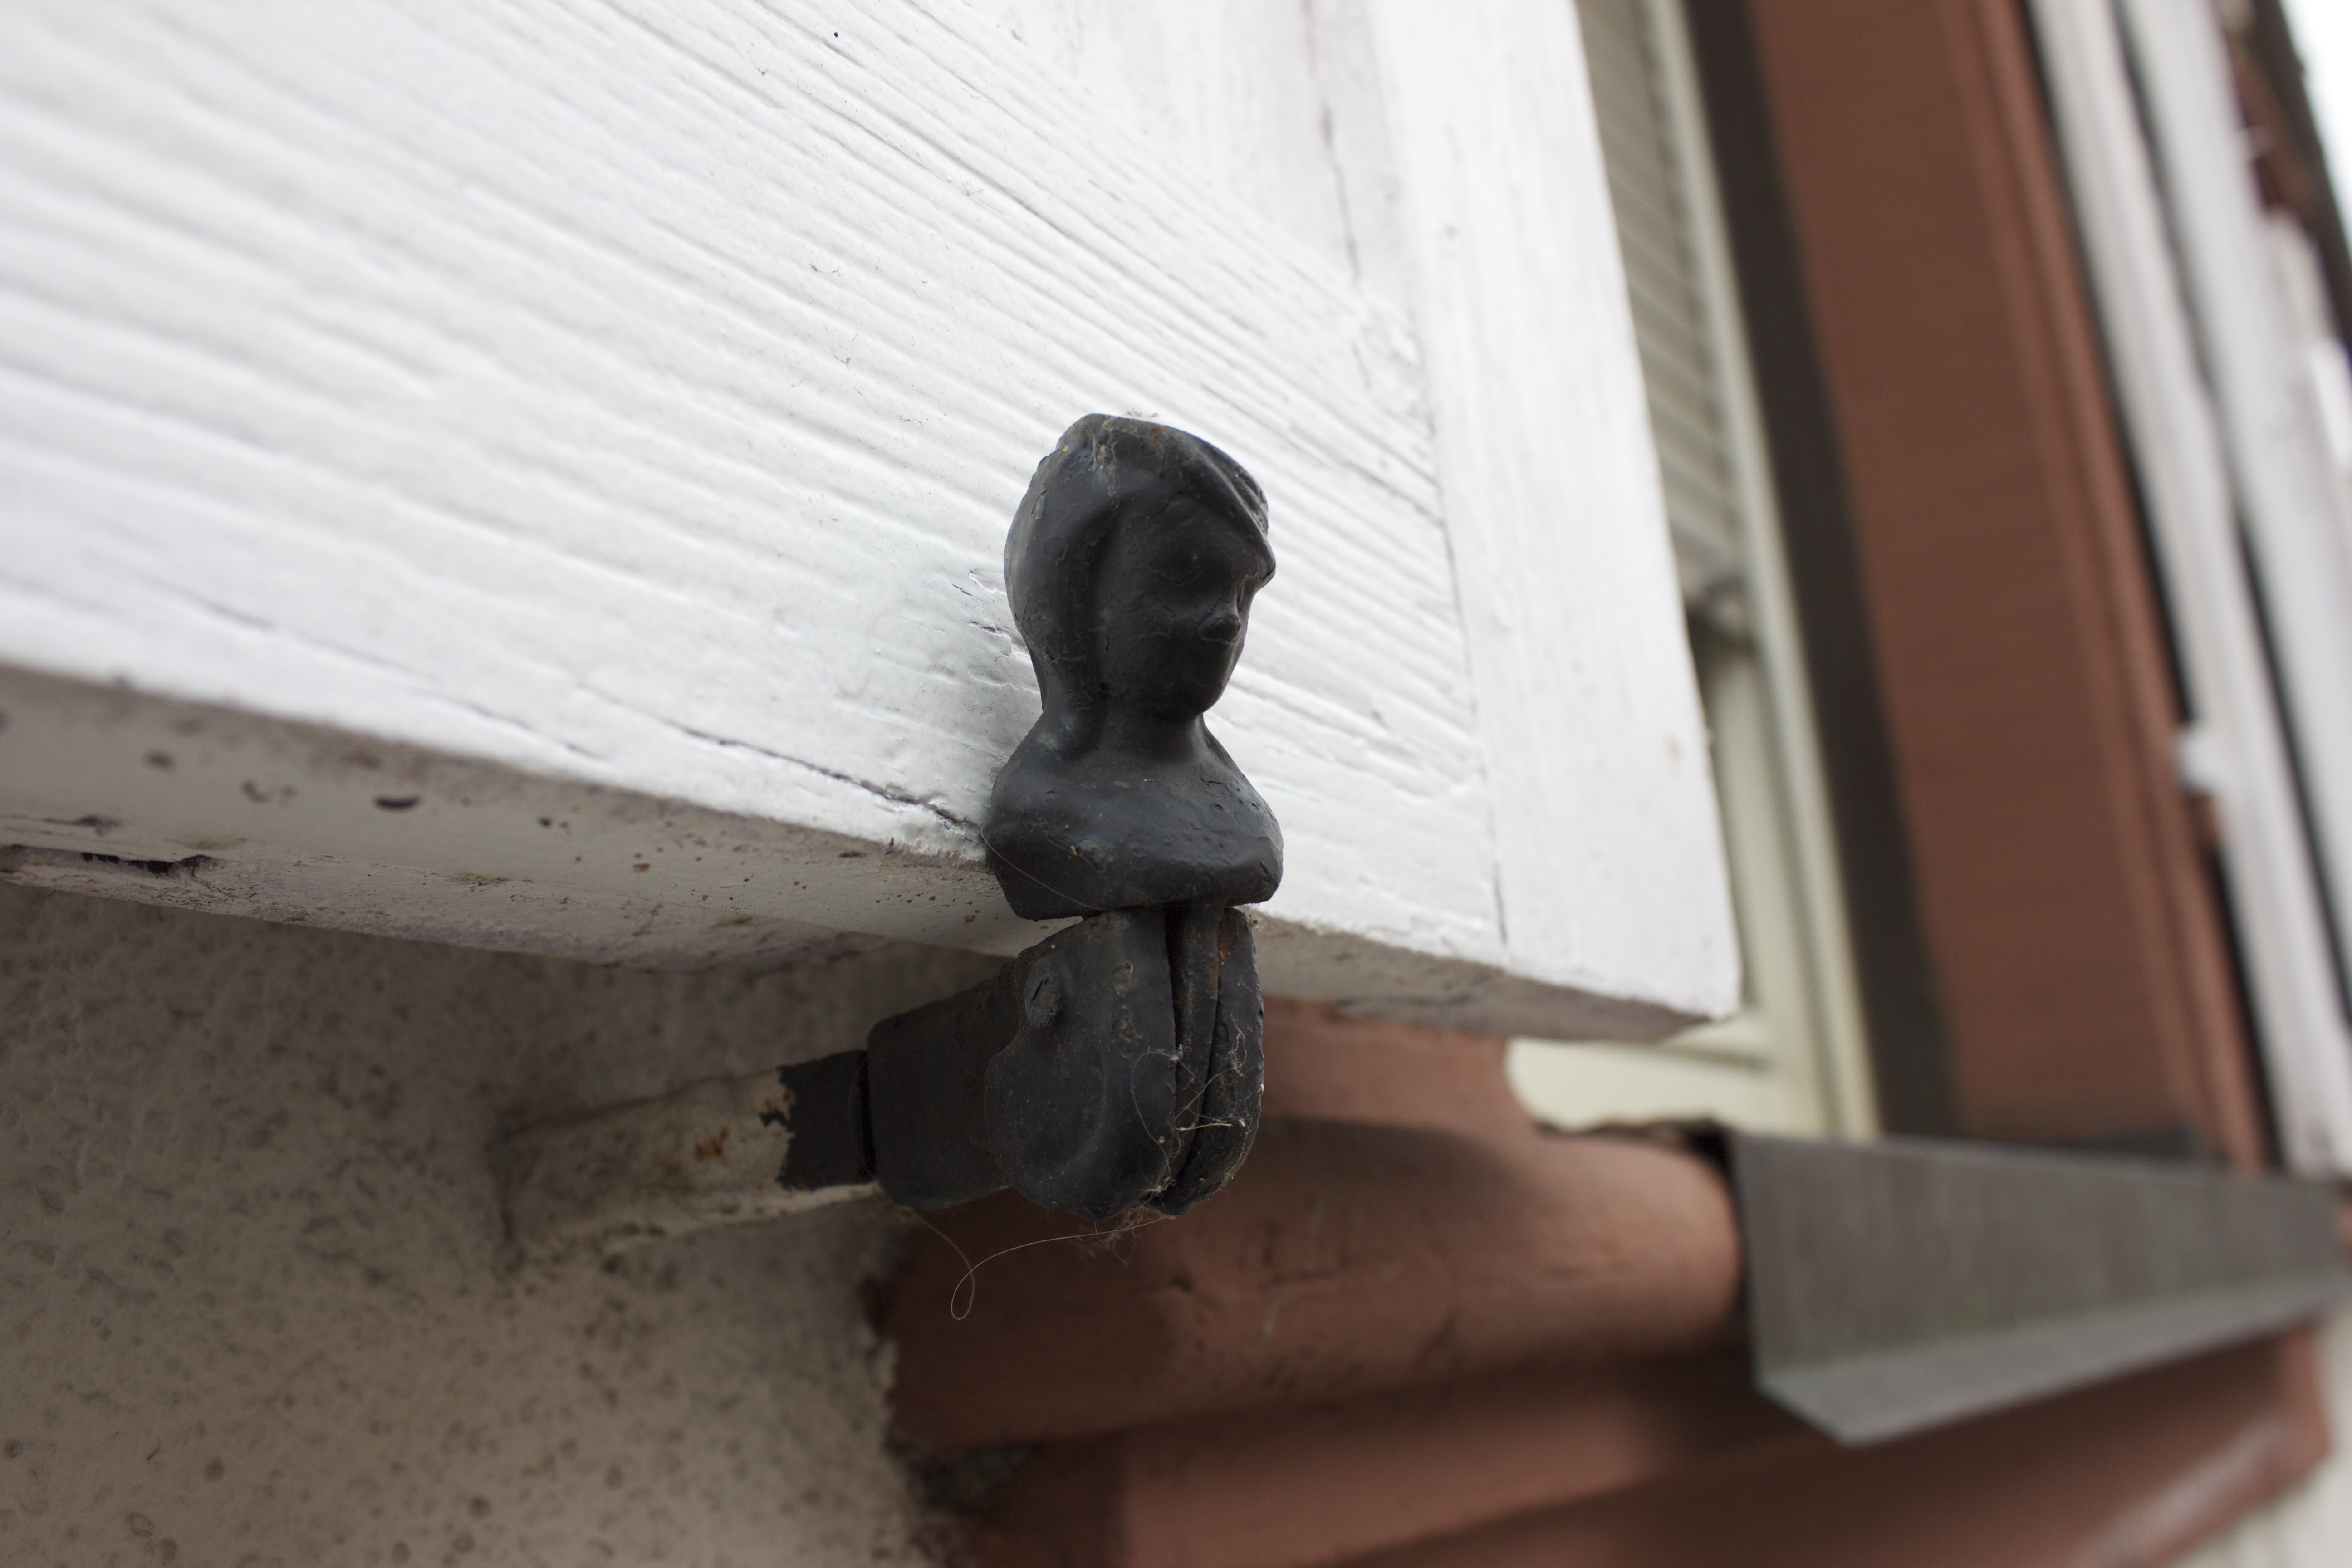 This little lady is used to prop open the shutters. Isn't she adorable?